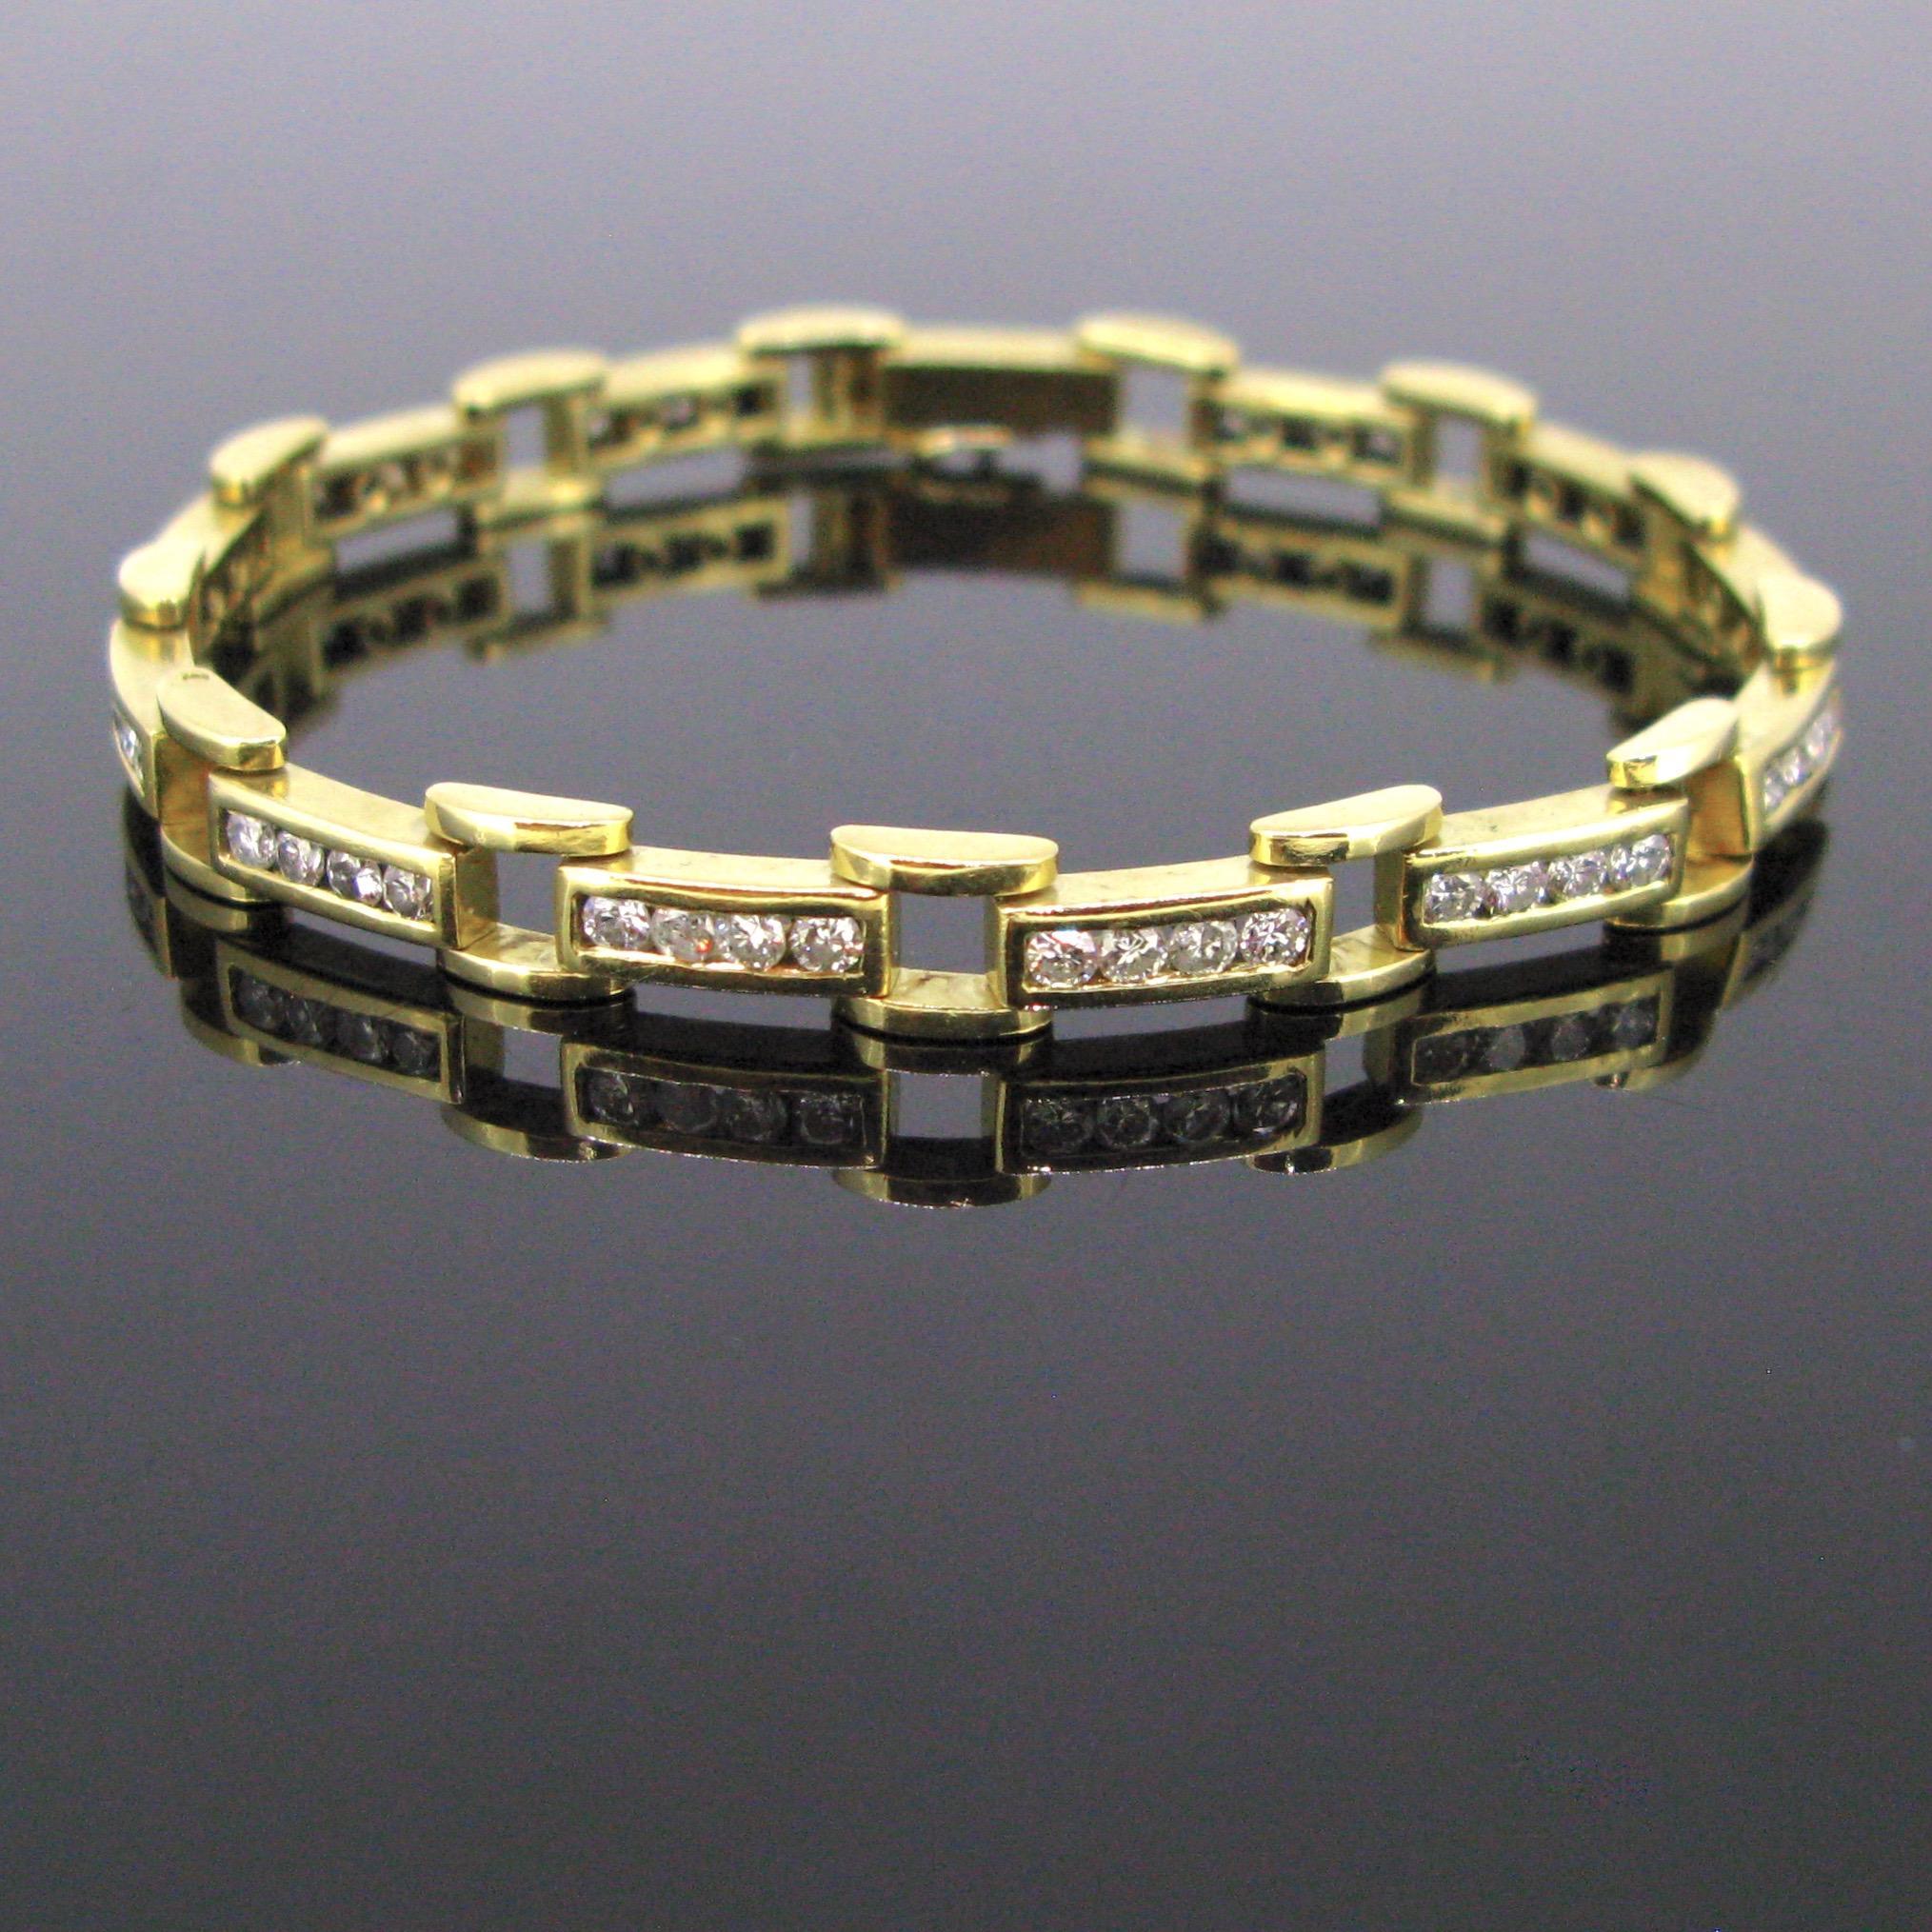 Weight:	20.57gr


Metal:	18kt yellow Gold 	


Stones:	52 Diamonds
•	Cut:	Brilliant
•	Total Carat Weight:	2.60ct approx
•	Colour:	H/I
•	Clarity:	VS/SI
	

Condition:	Very Good


Hallmarks:	French – eagle’s heads
	

Comments:	This bracelet is set with